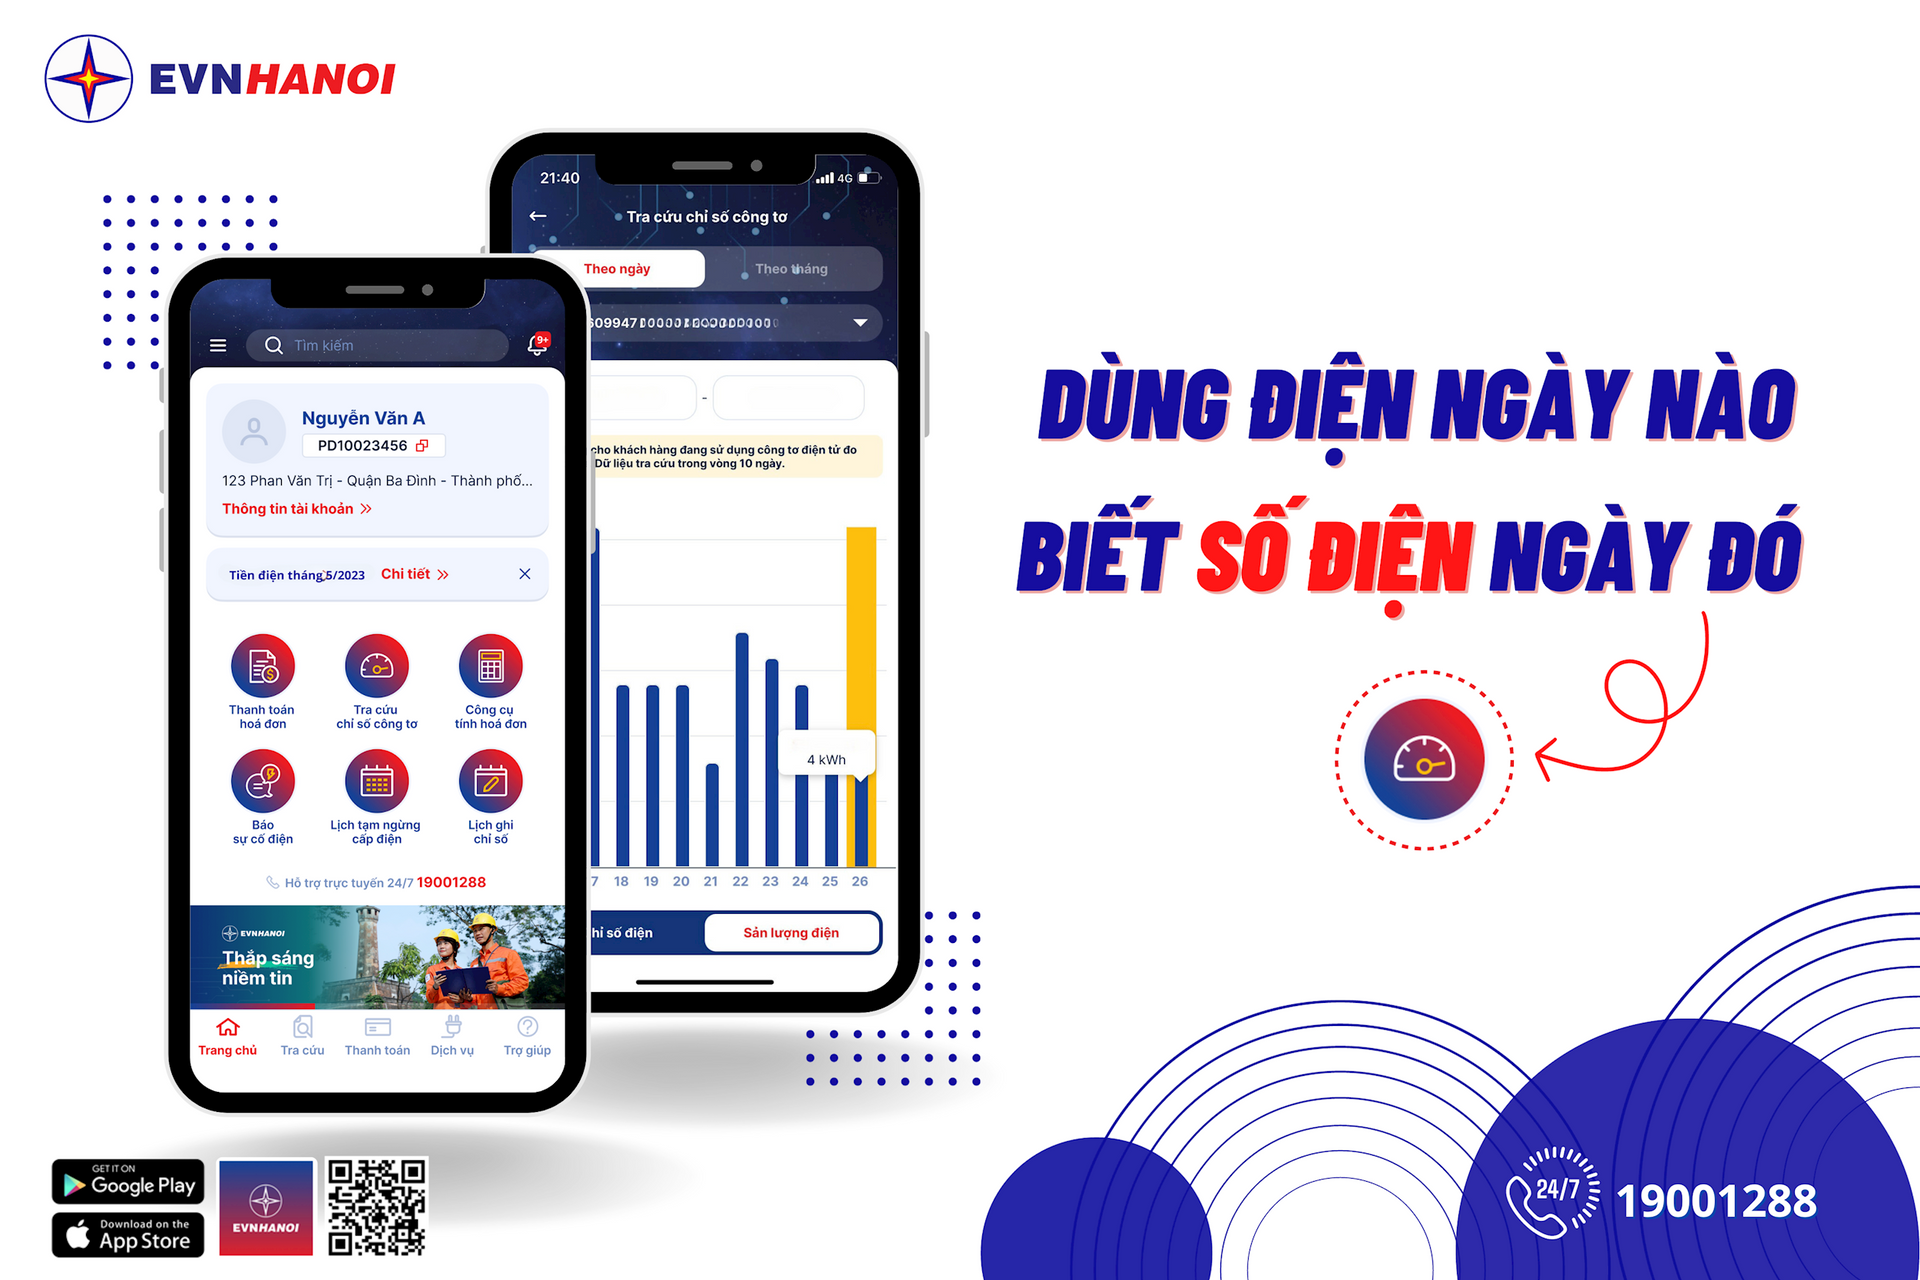 anh-3-dung-dien-ngay-nao-biet-so-dien-ngay-do-cung-app-evnhanoi.png